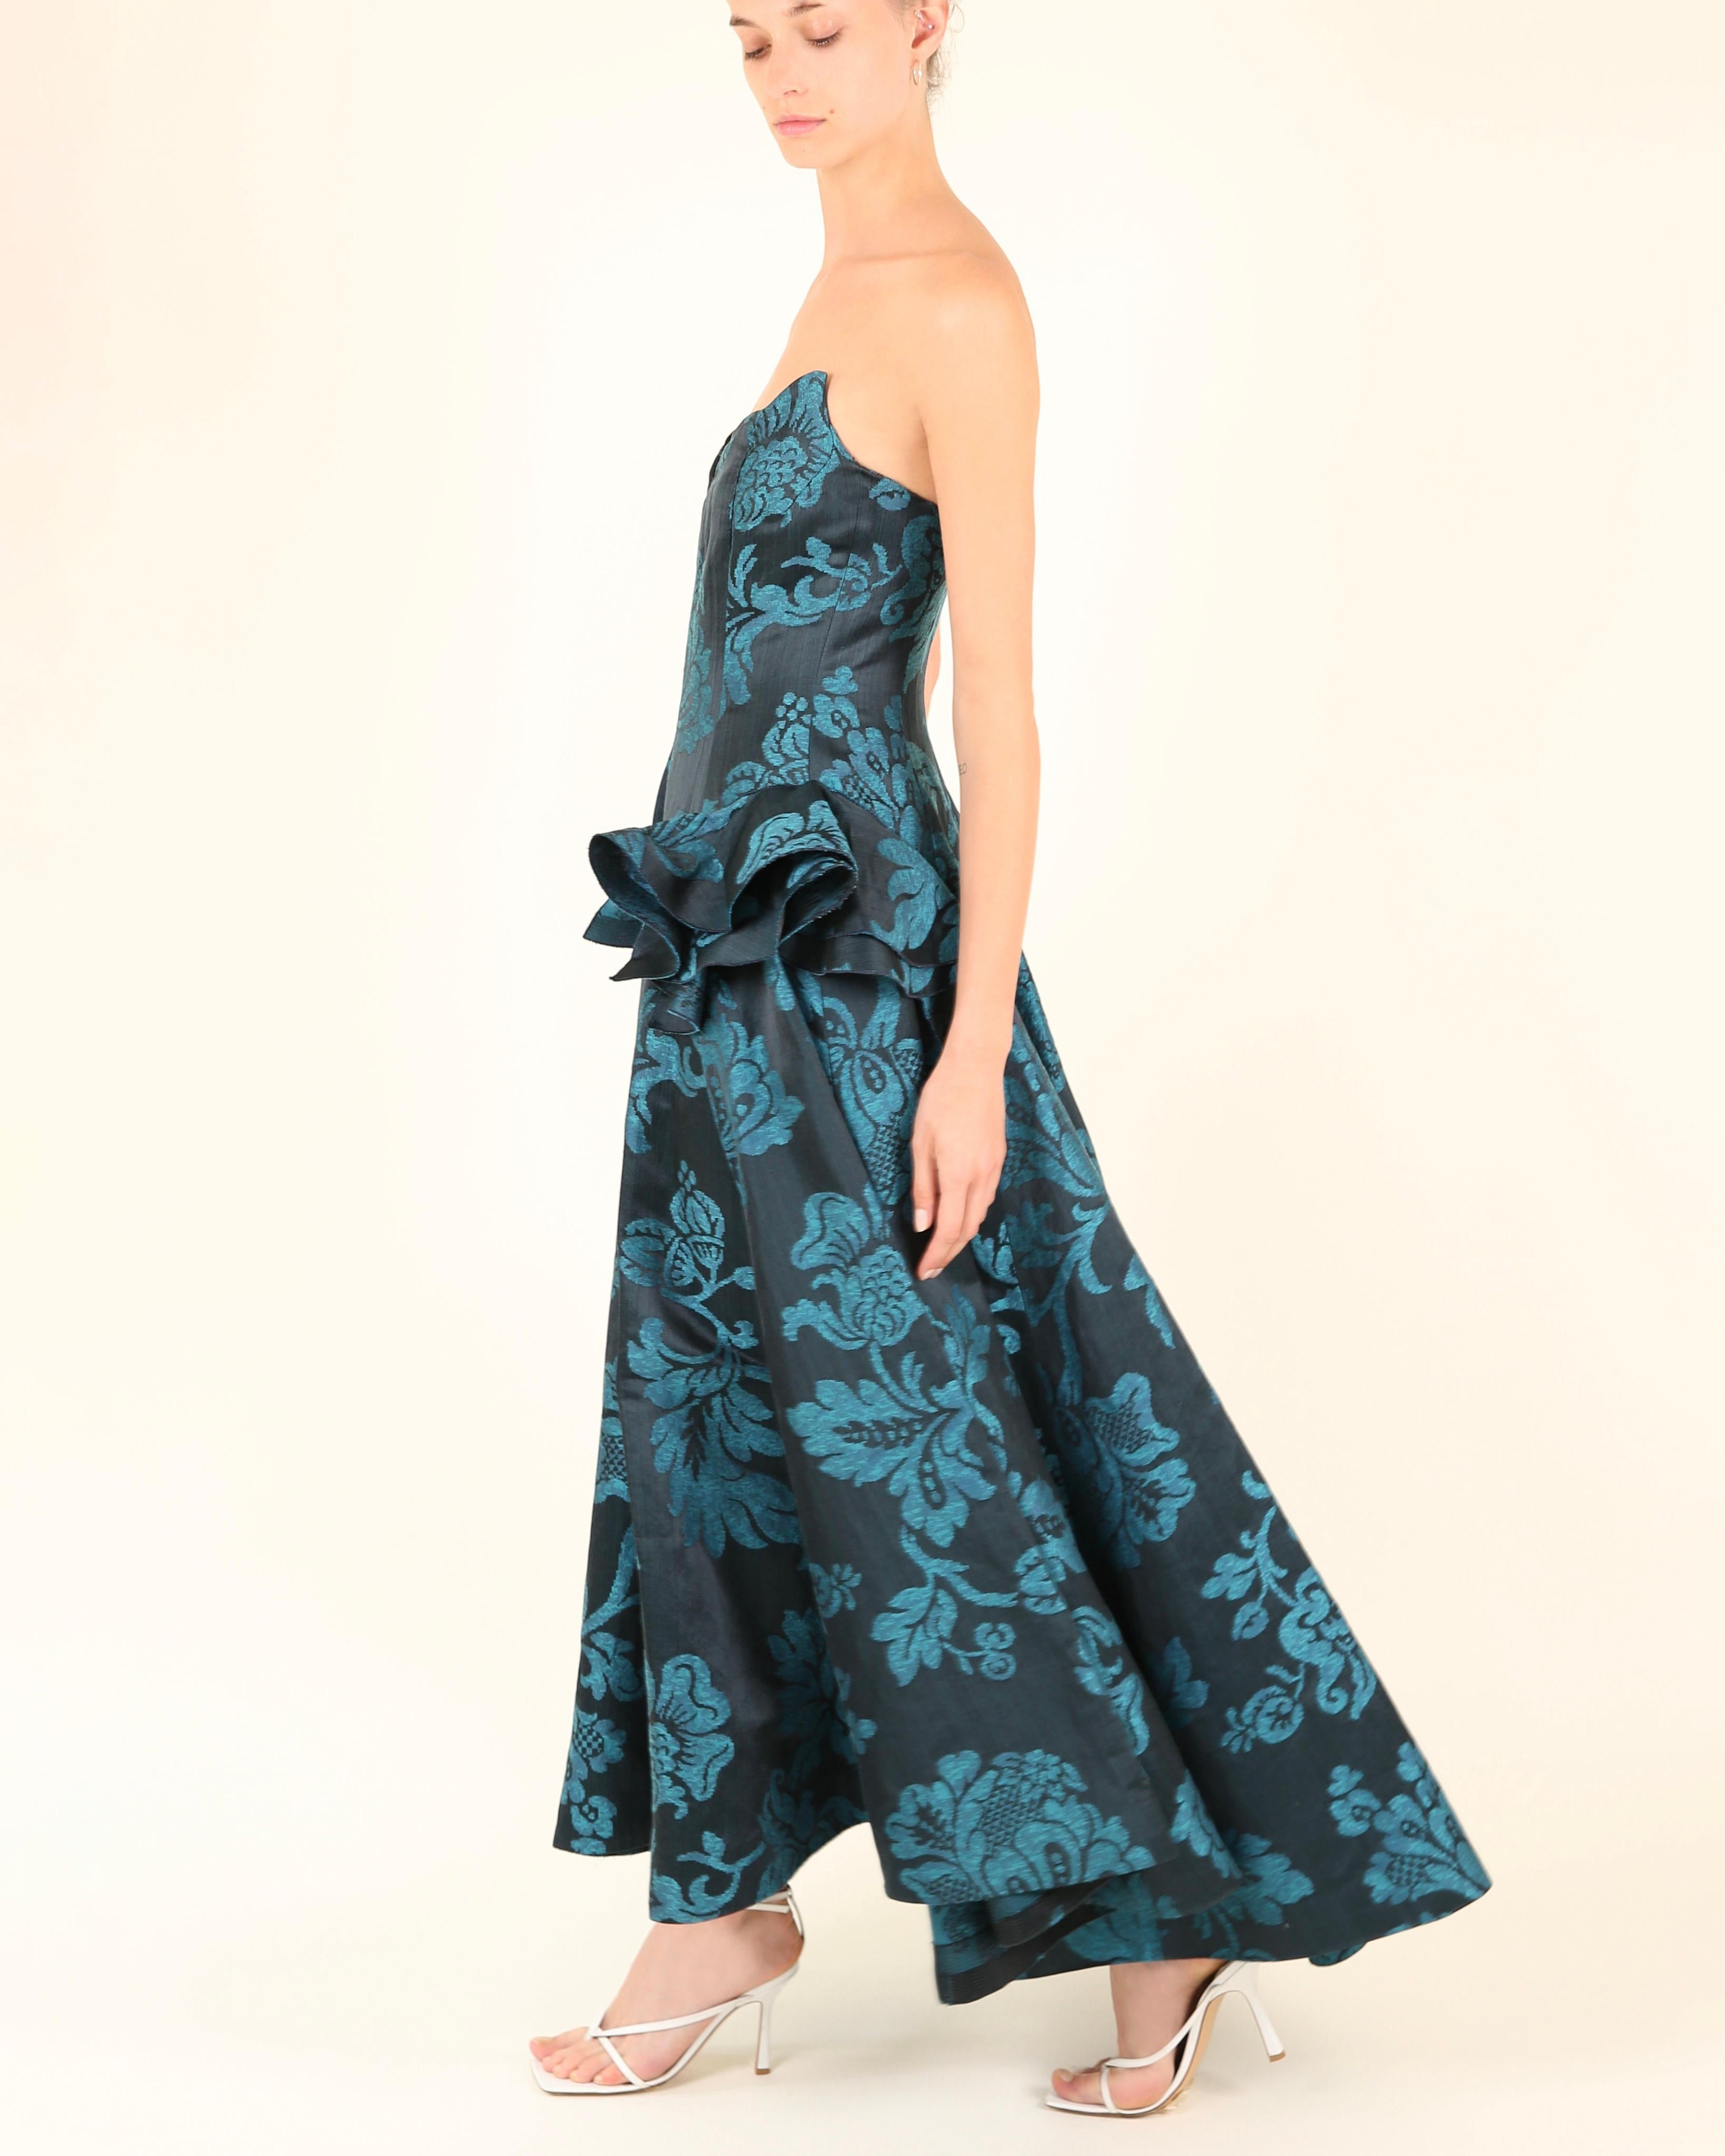 Oscar de la Renta F/W06 strapless floral blue teal fit and flare dress gown XS For Sale 7